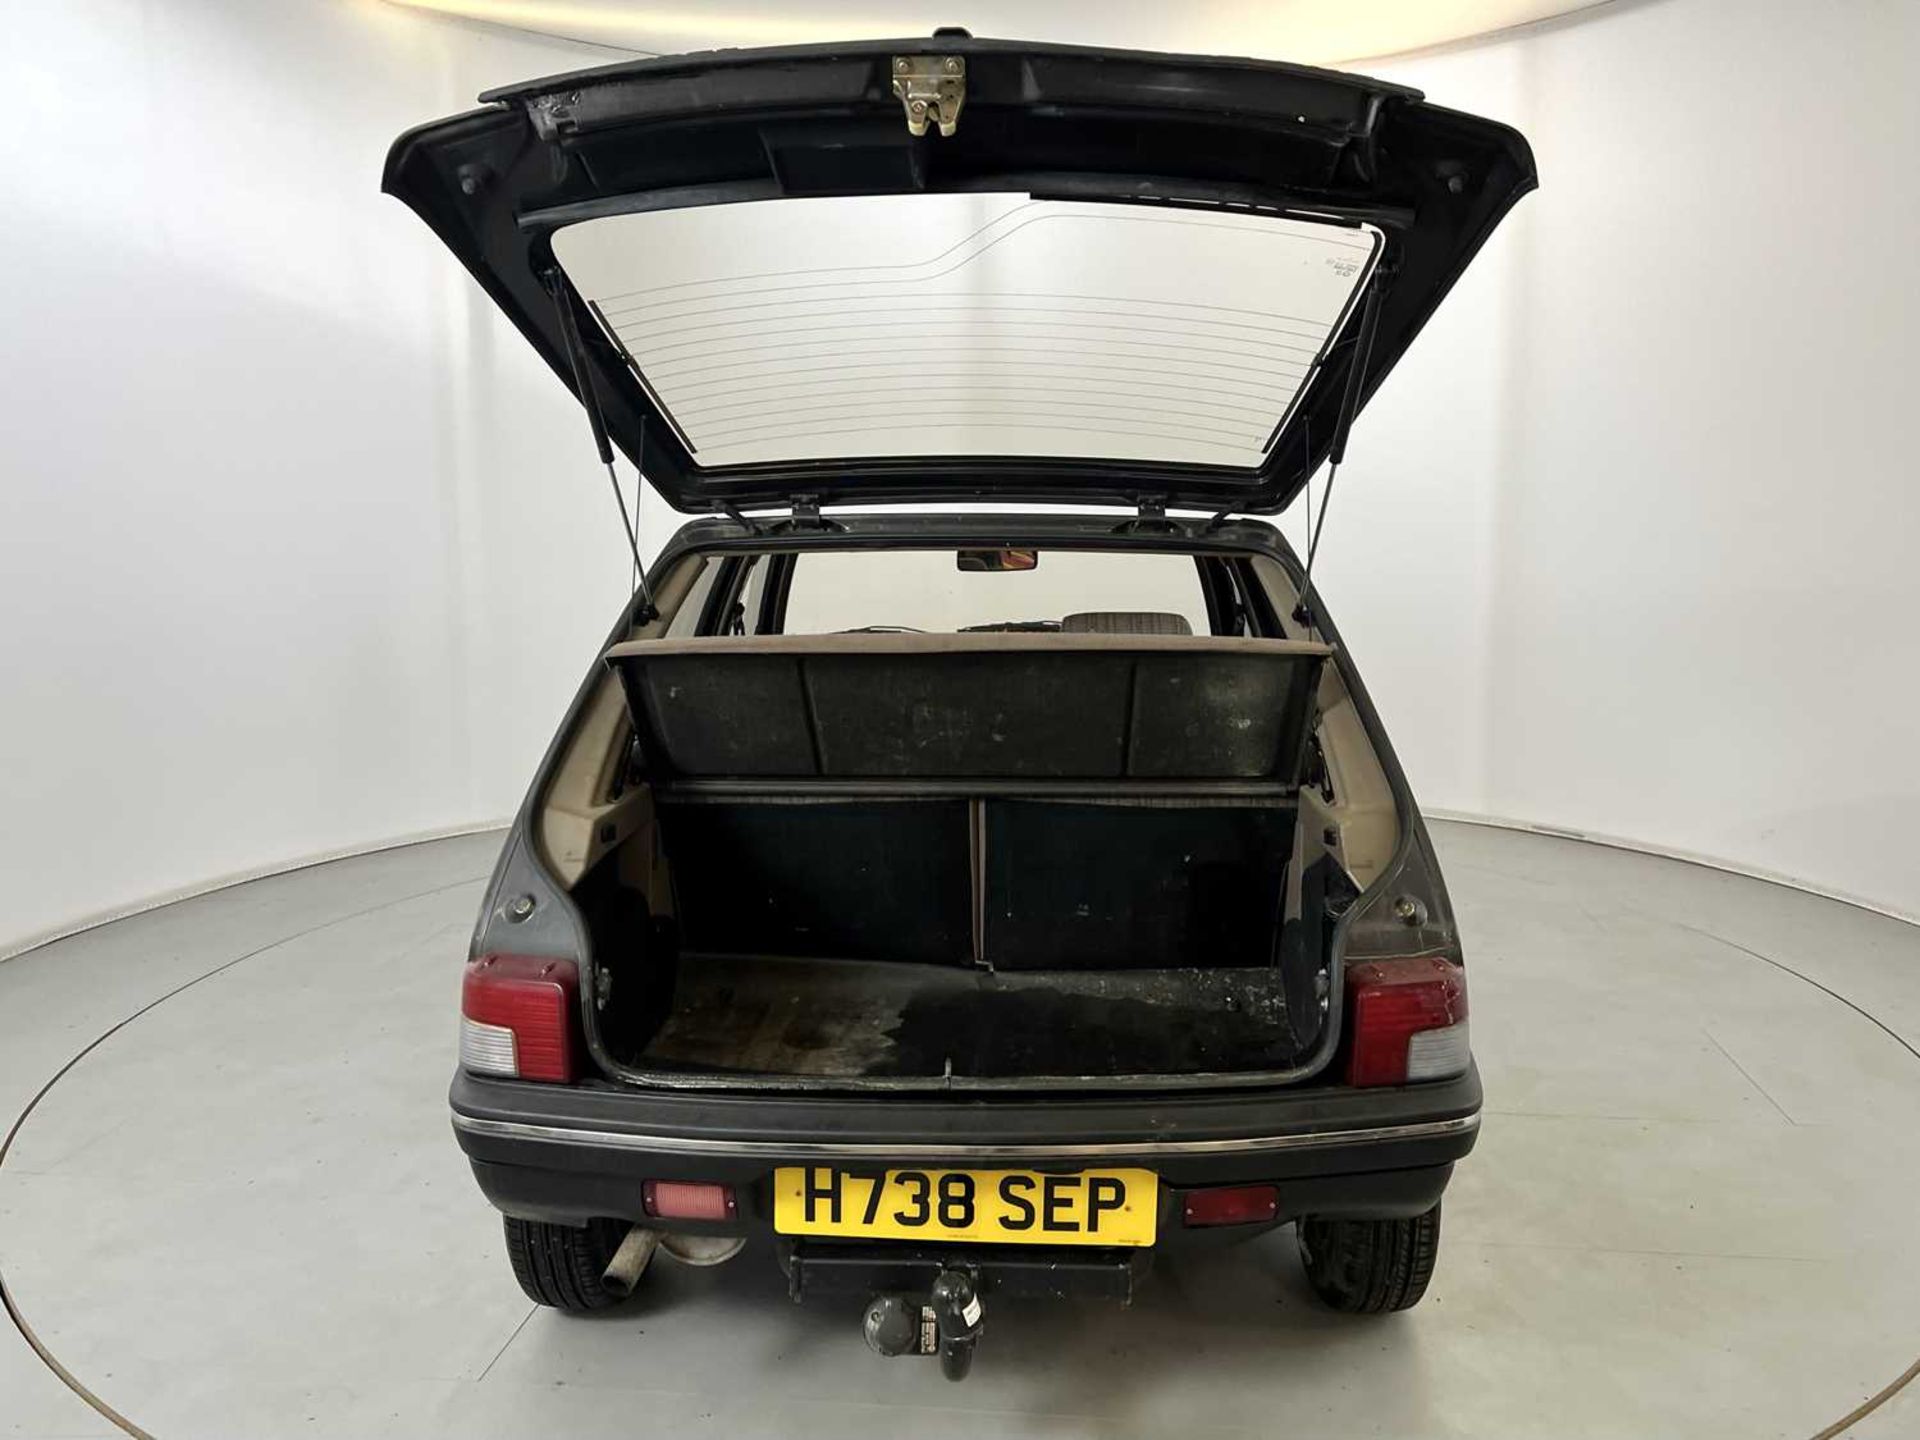 1990 Peugeot 205 GRD - Image 31 of 33